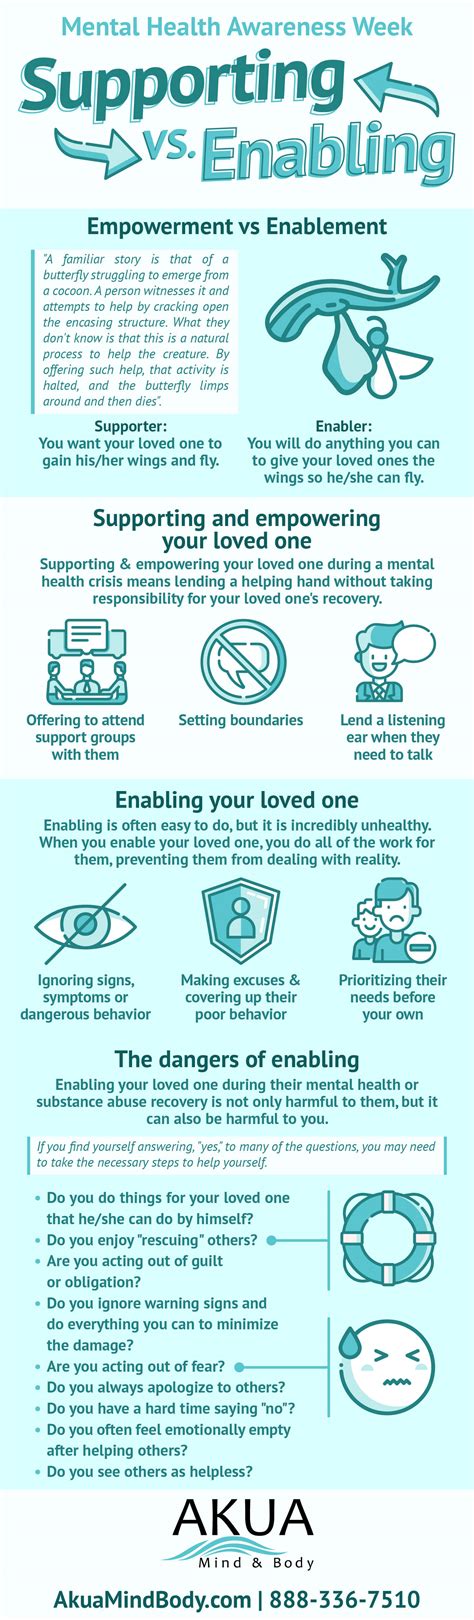 Mental Illness Awareness - Tips to Help Your Loves from Mental Illness